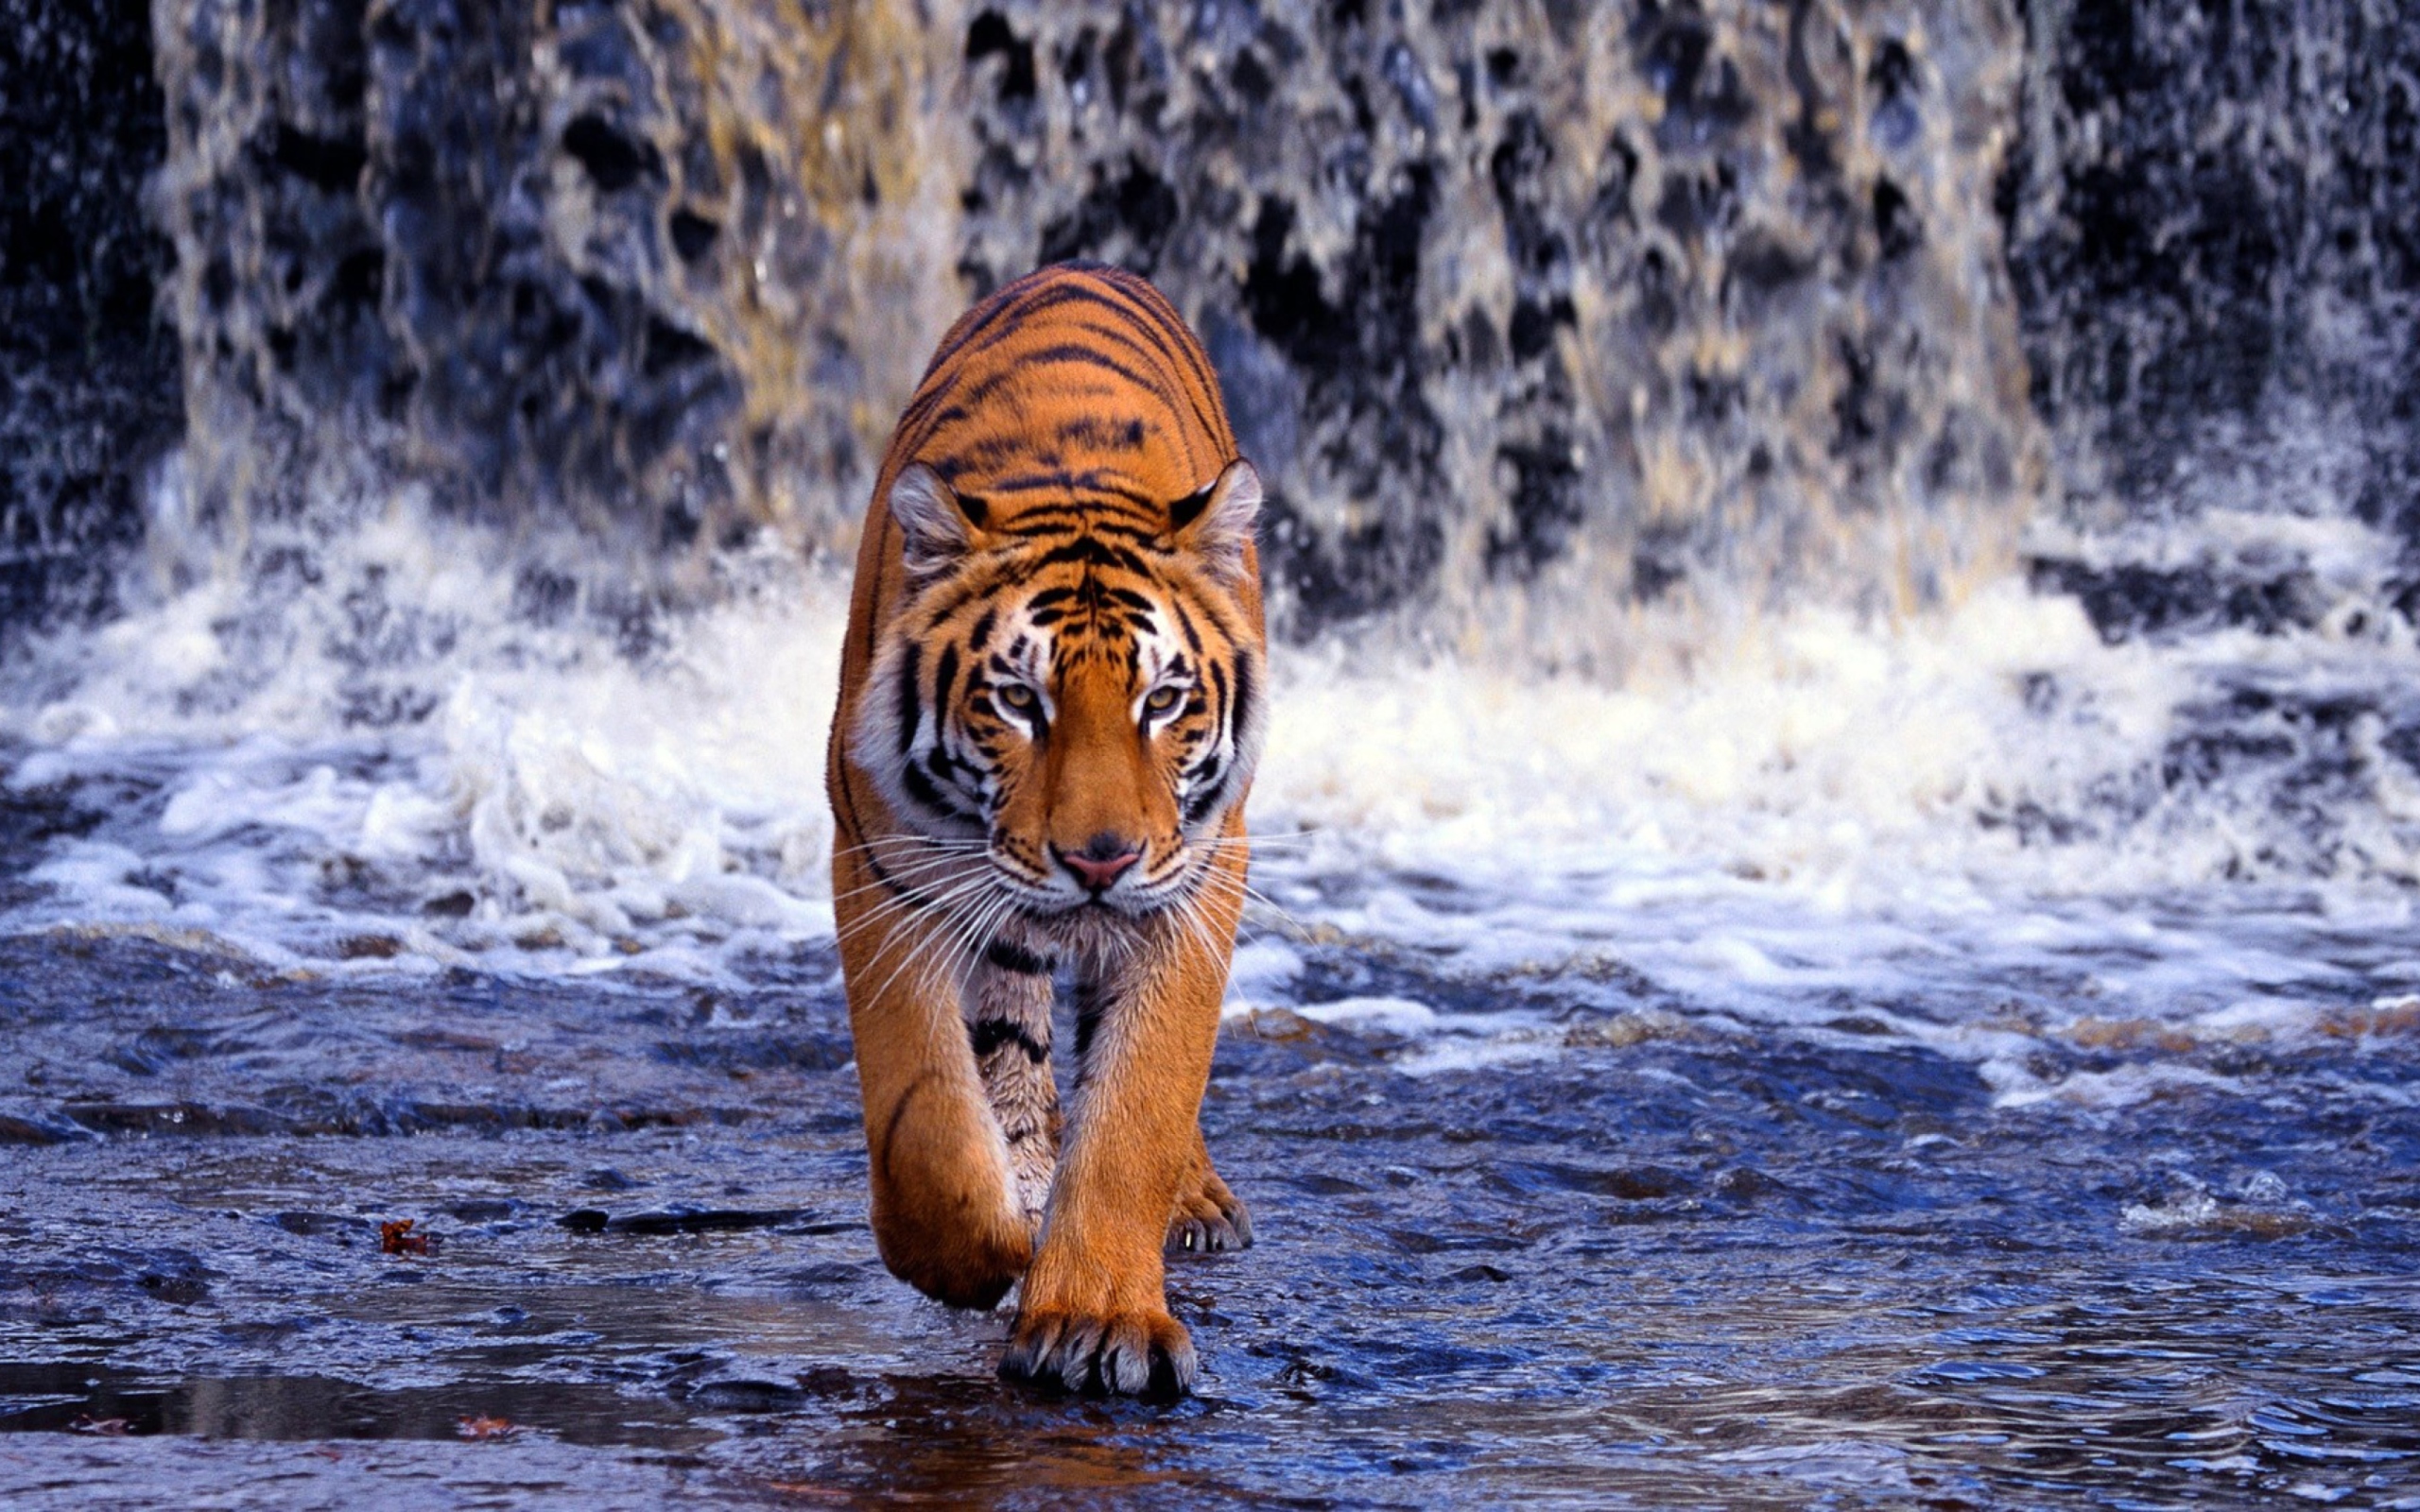 Tiger And Waterfall wallpaper 2560x1600